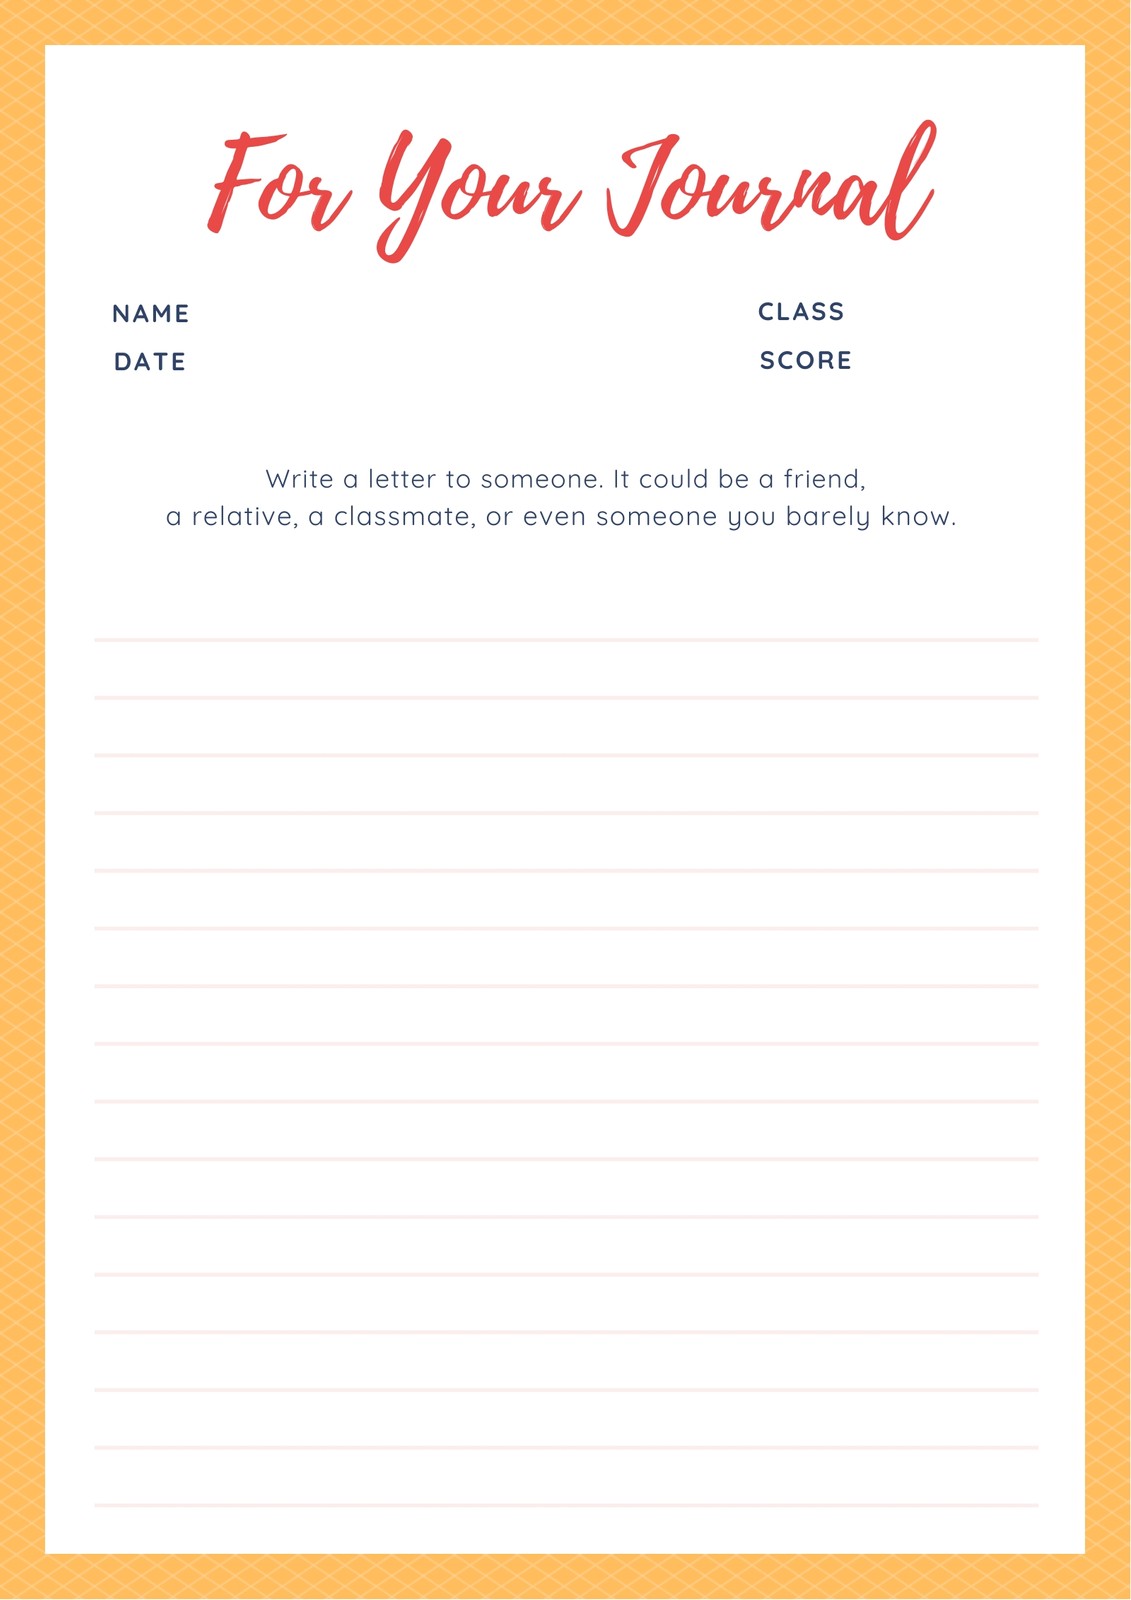 Yellow Bordered Simple Journal Writing Prompt Worksheet - Templates by